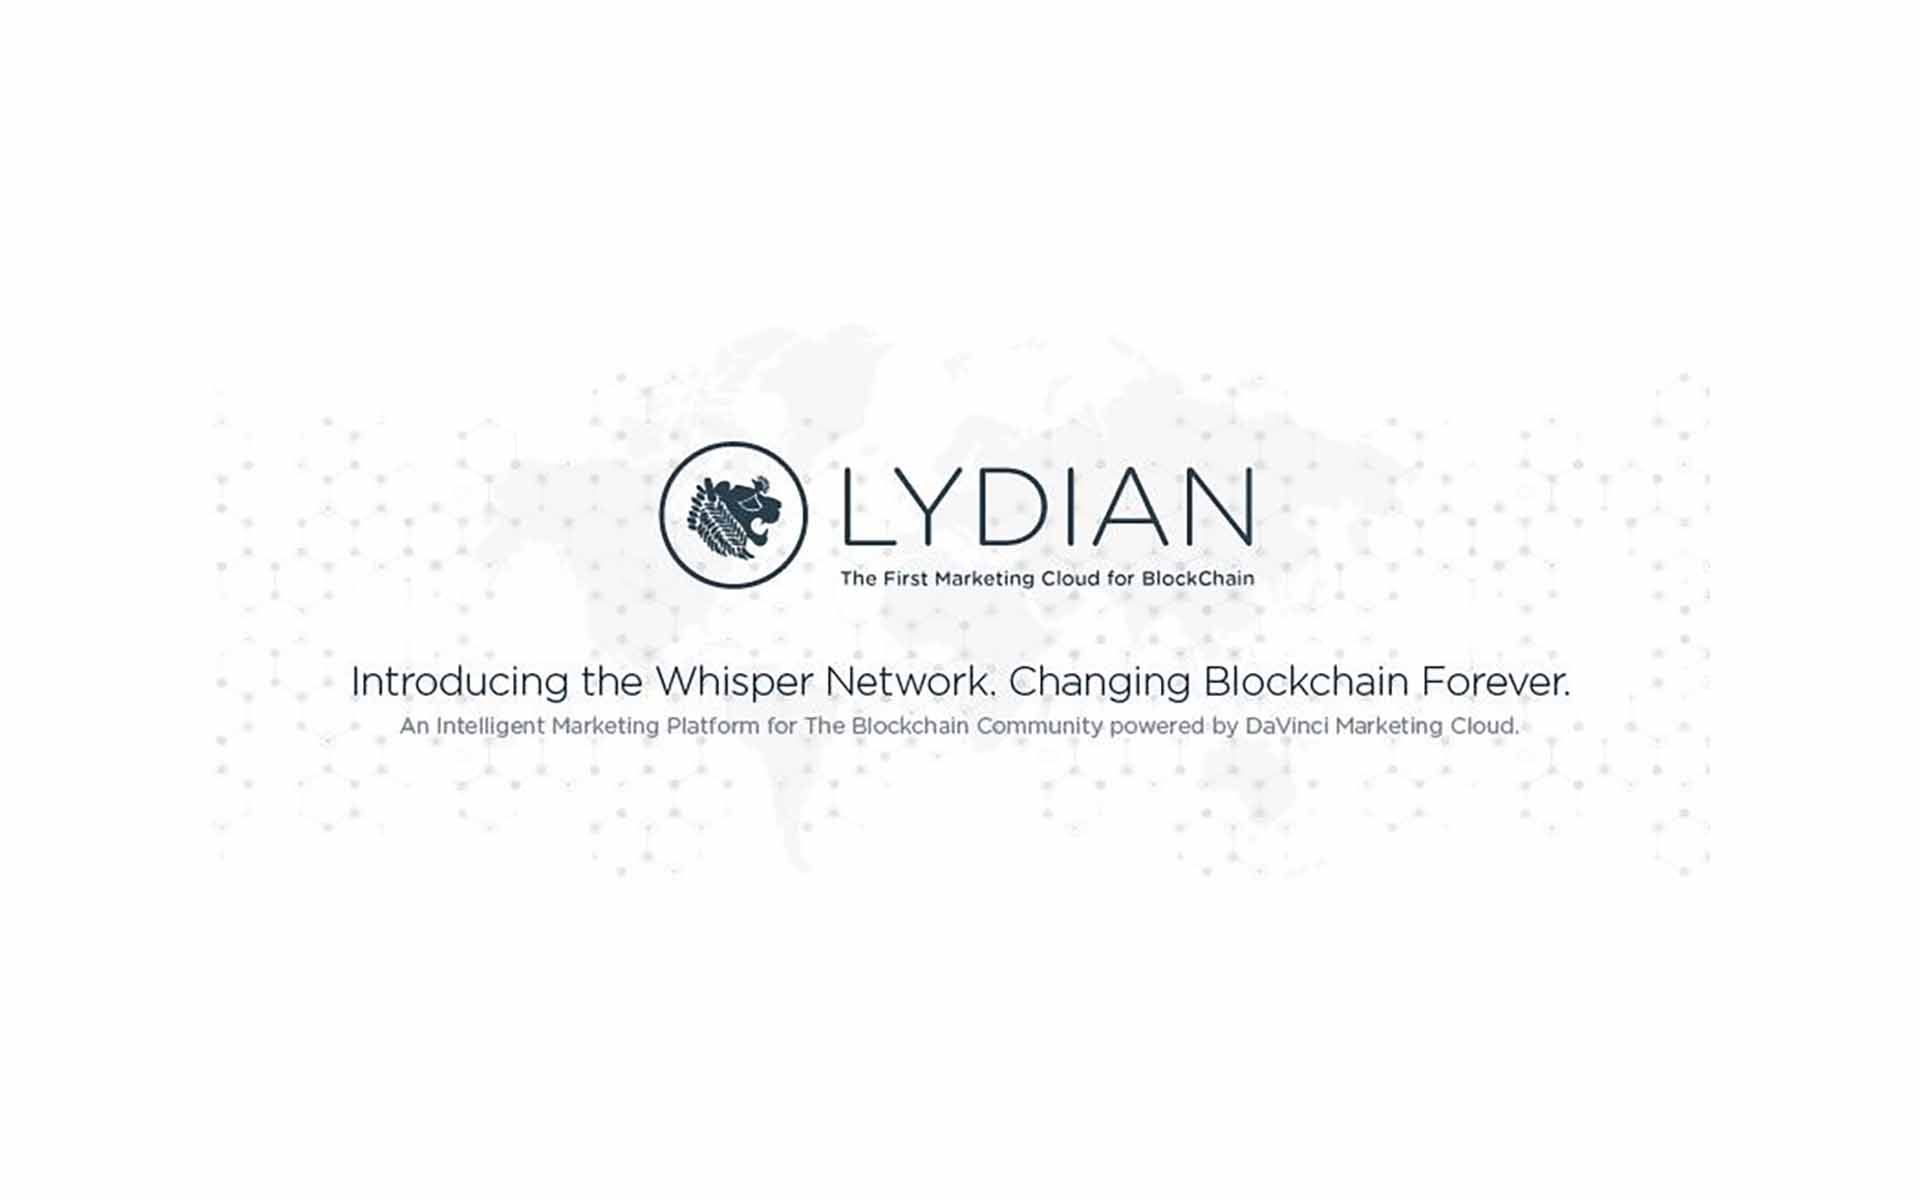 10 Hours Left to Participate in the LydianCoin ICO - Exclusive Offers to Participate in the Biggest Blockchain Marketing ICO